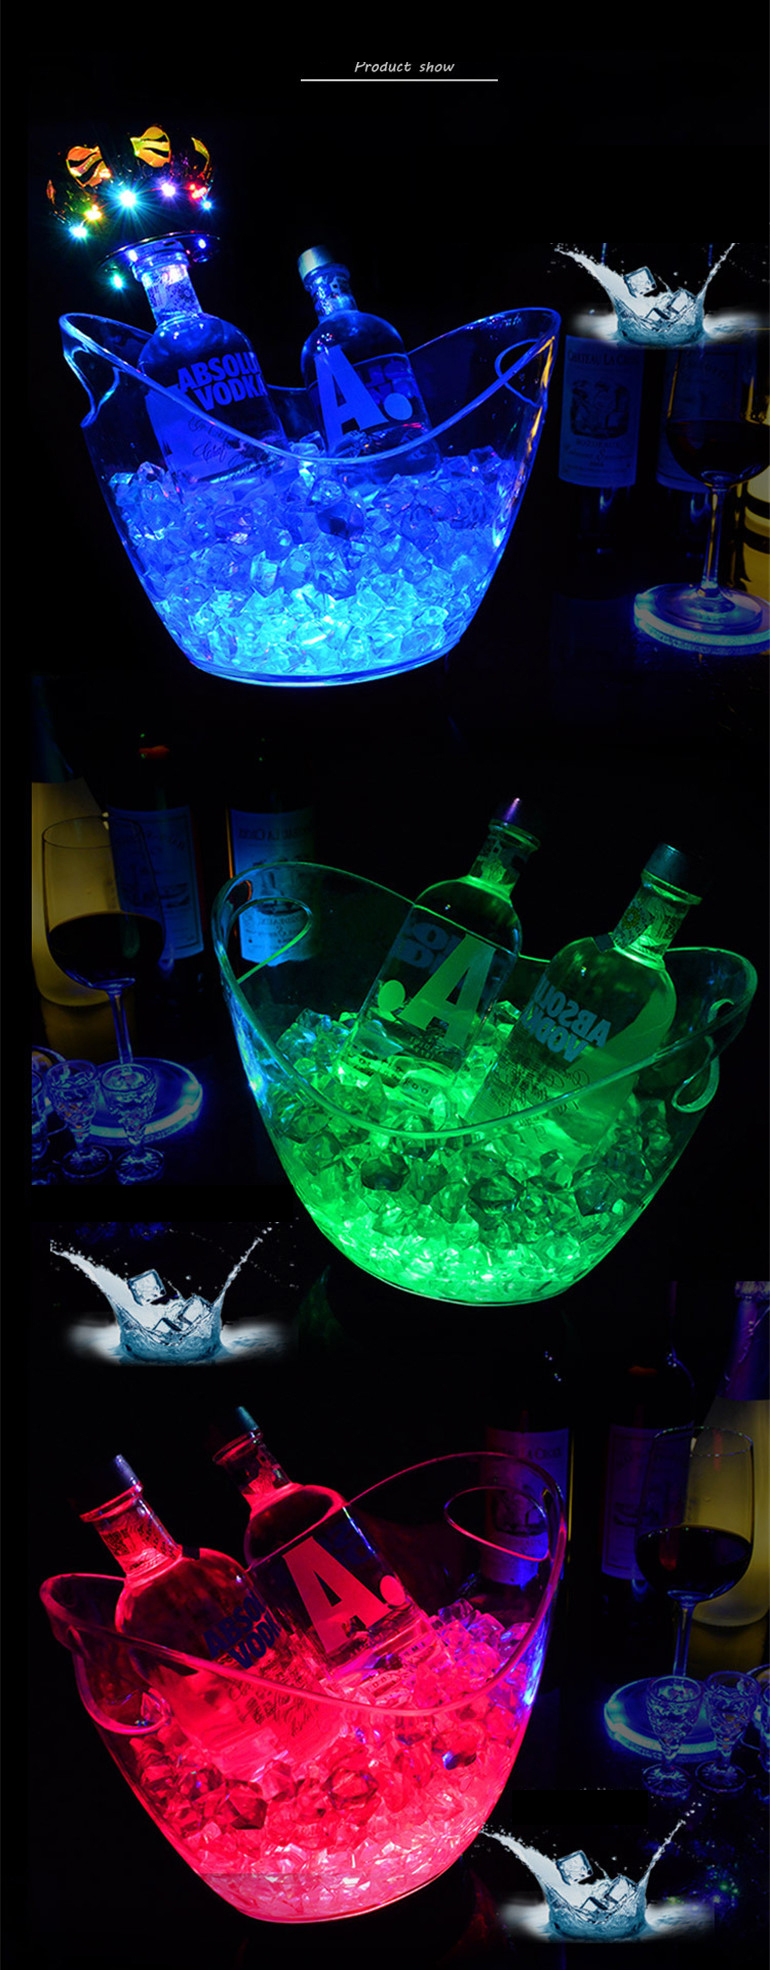 COLOUR CHANGING LED ICE BUCKET CHAMPAGNE WINE DRINK COOLER RETRO PARTY BAR XMAS